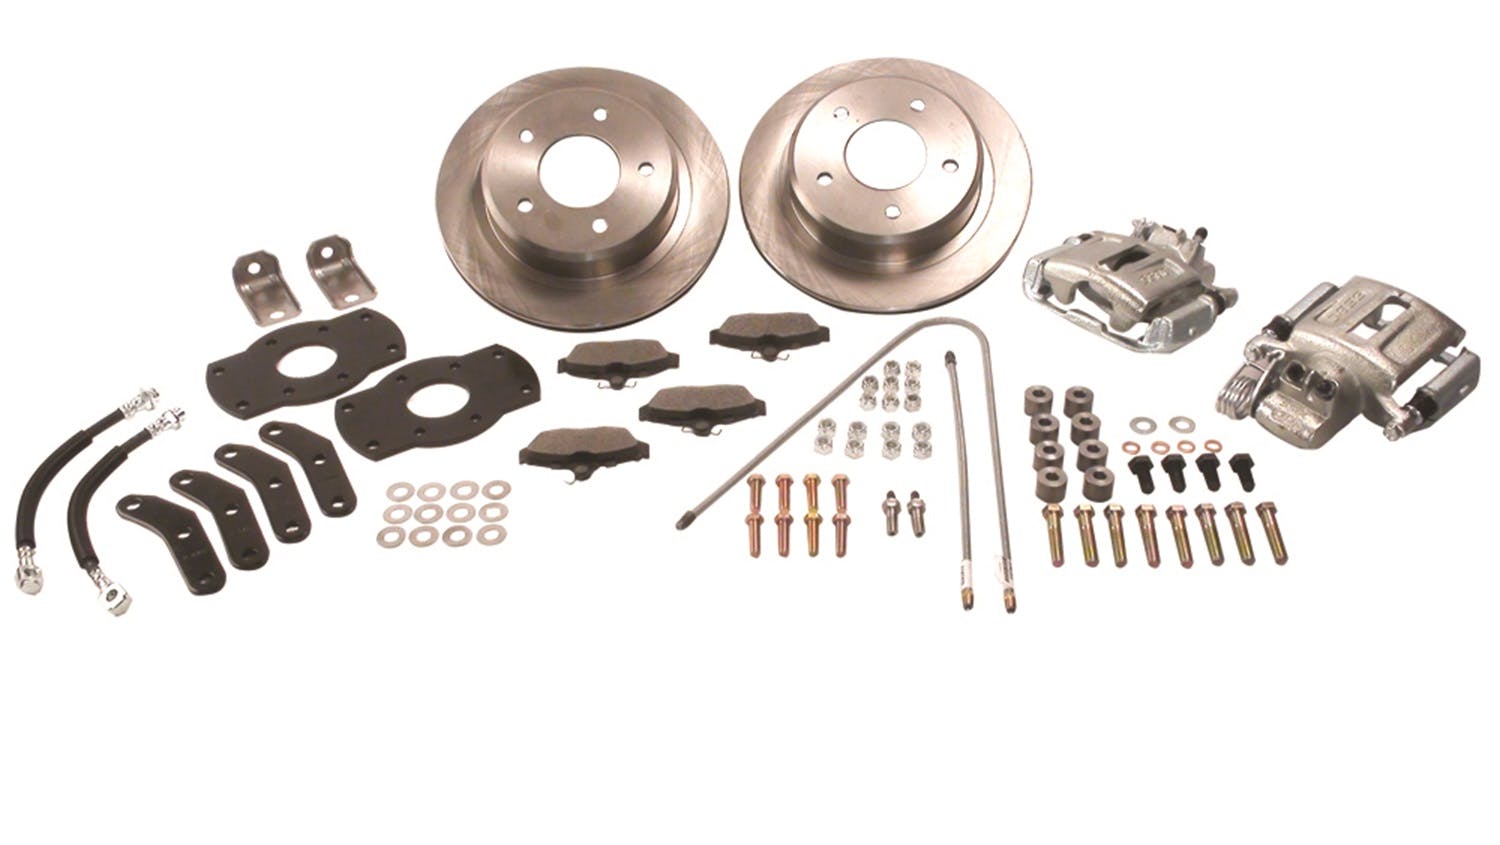 Stainless Steel Brakes A128-4R Kit A128-4 w/red calipers